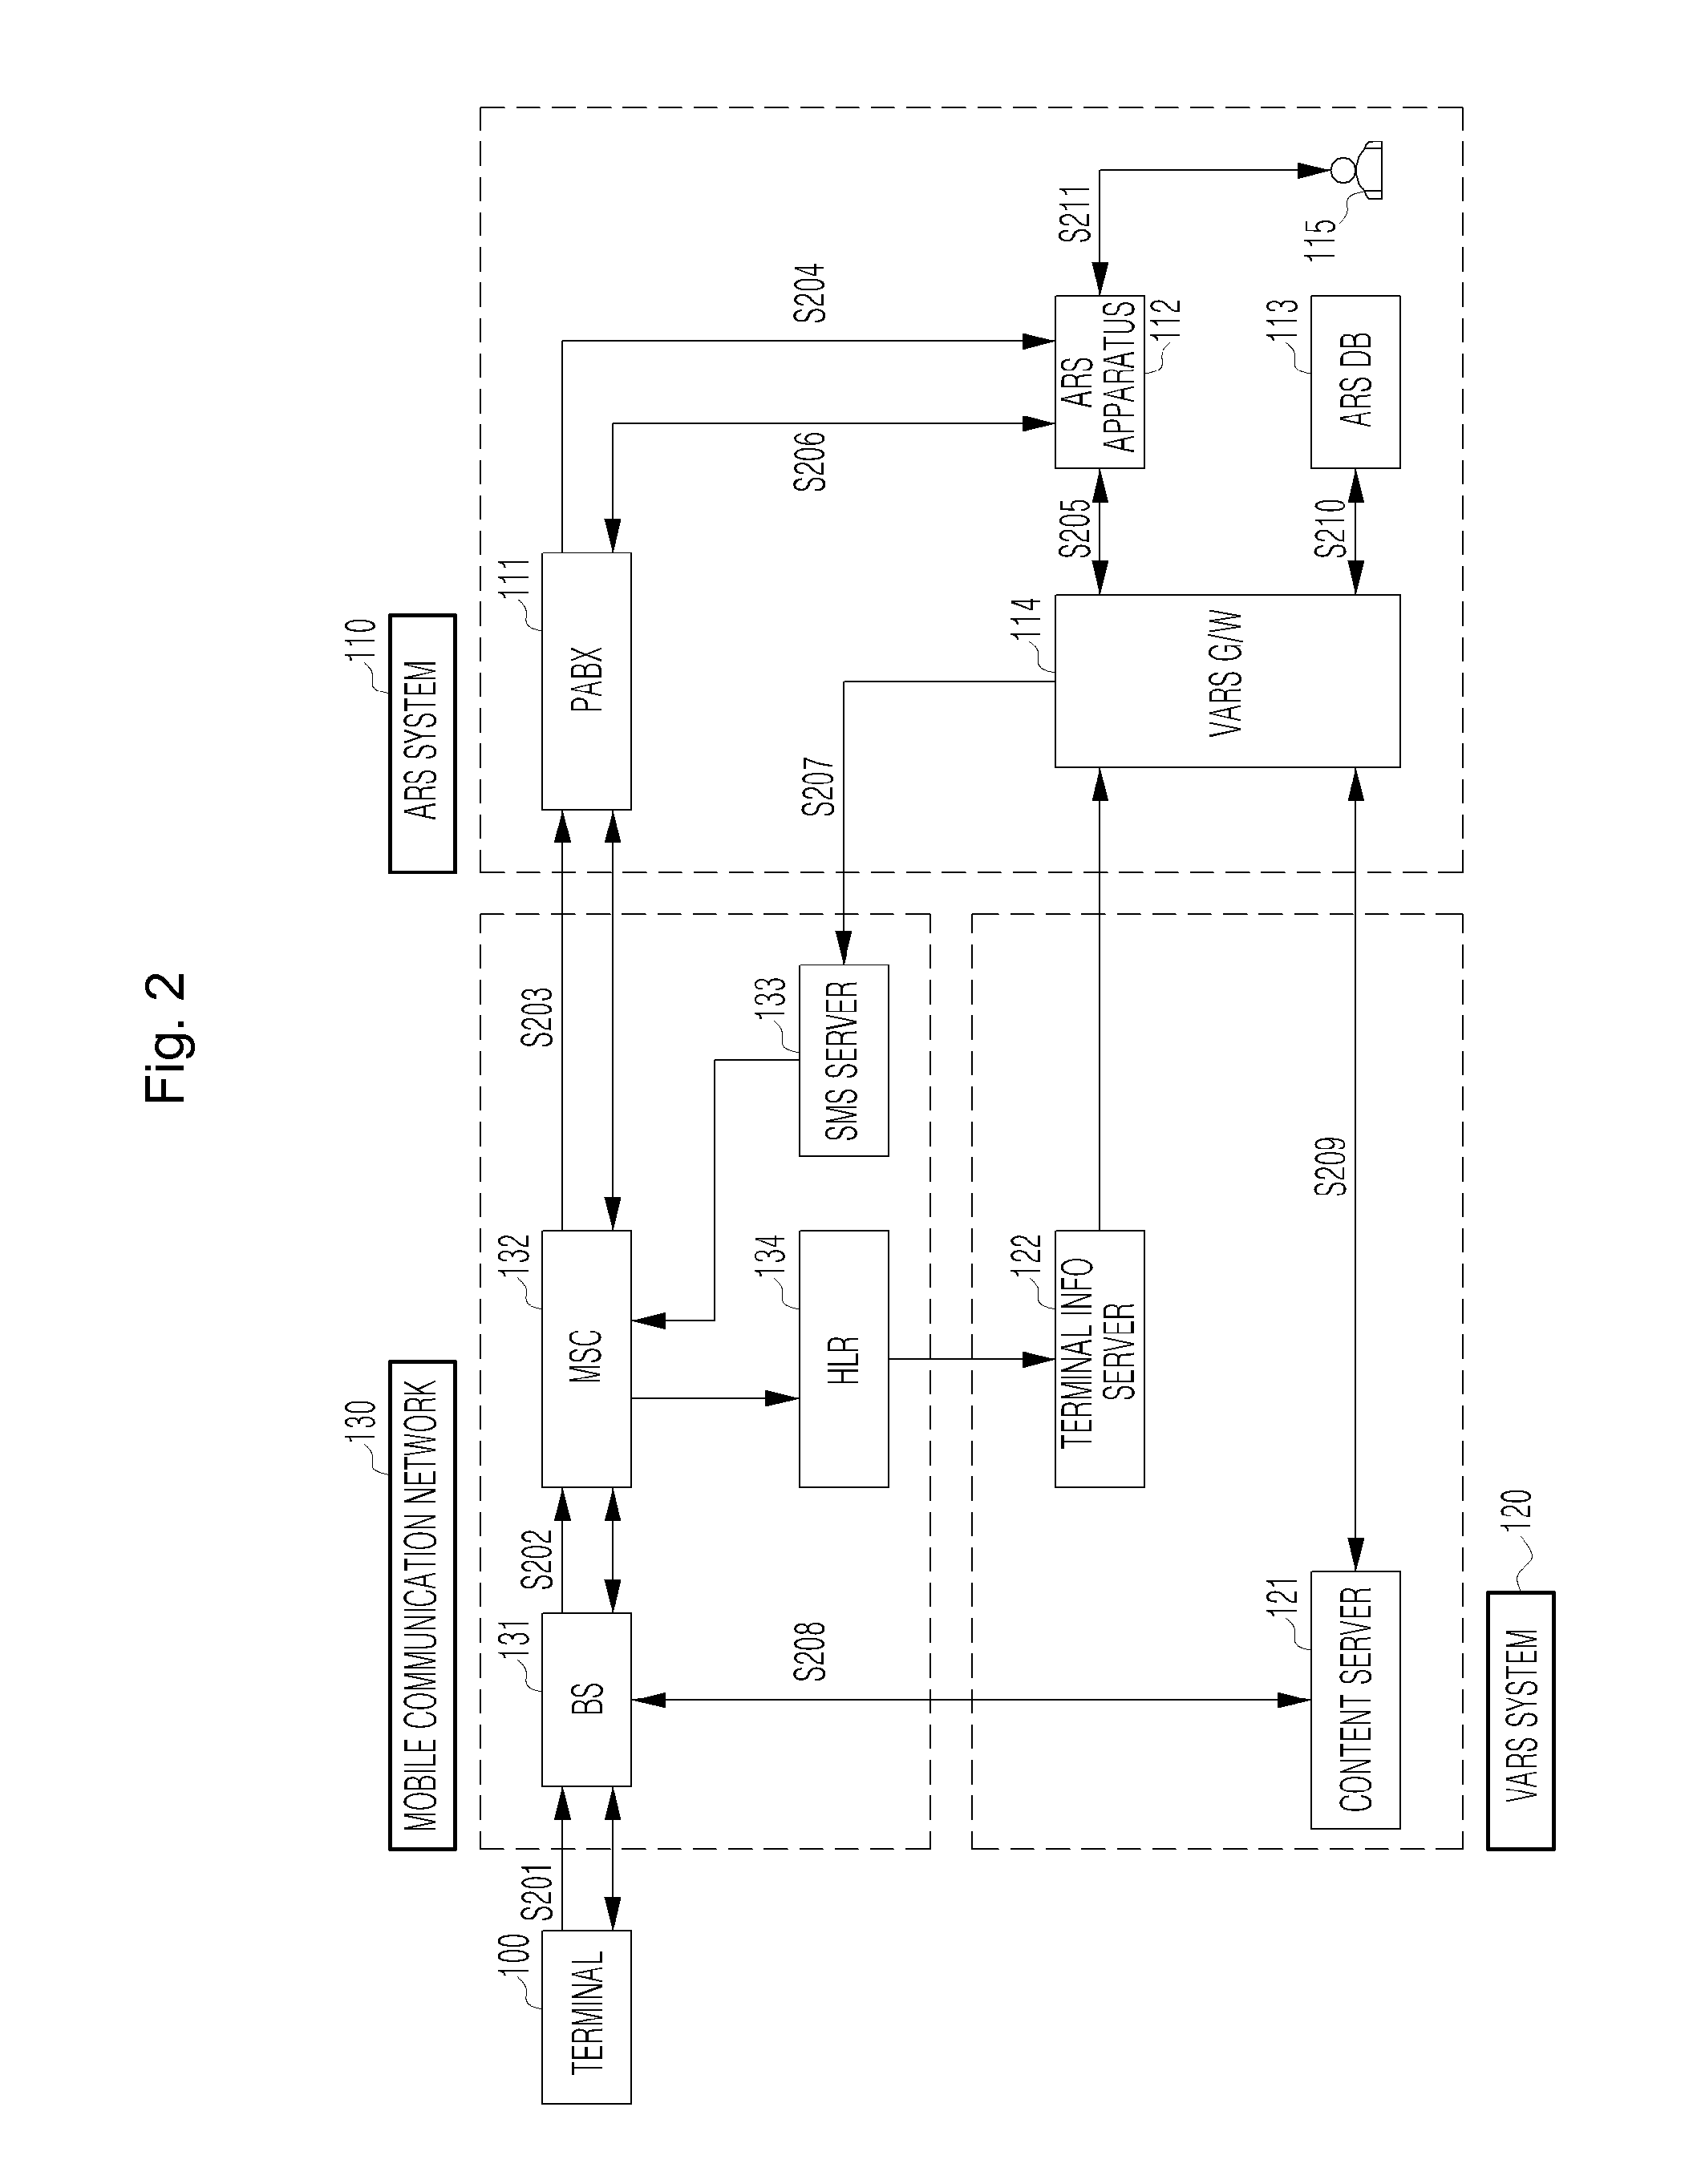 Visual ars service system and method enabled by mobile terminal's call control function